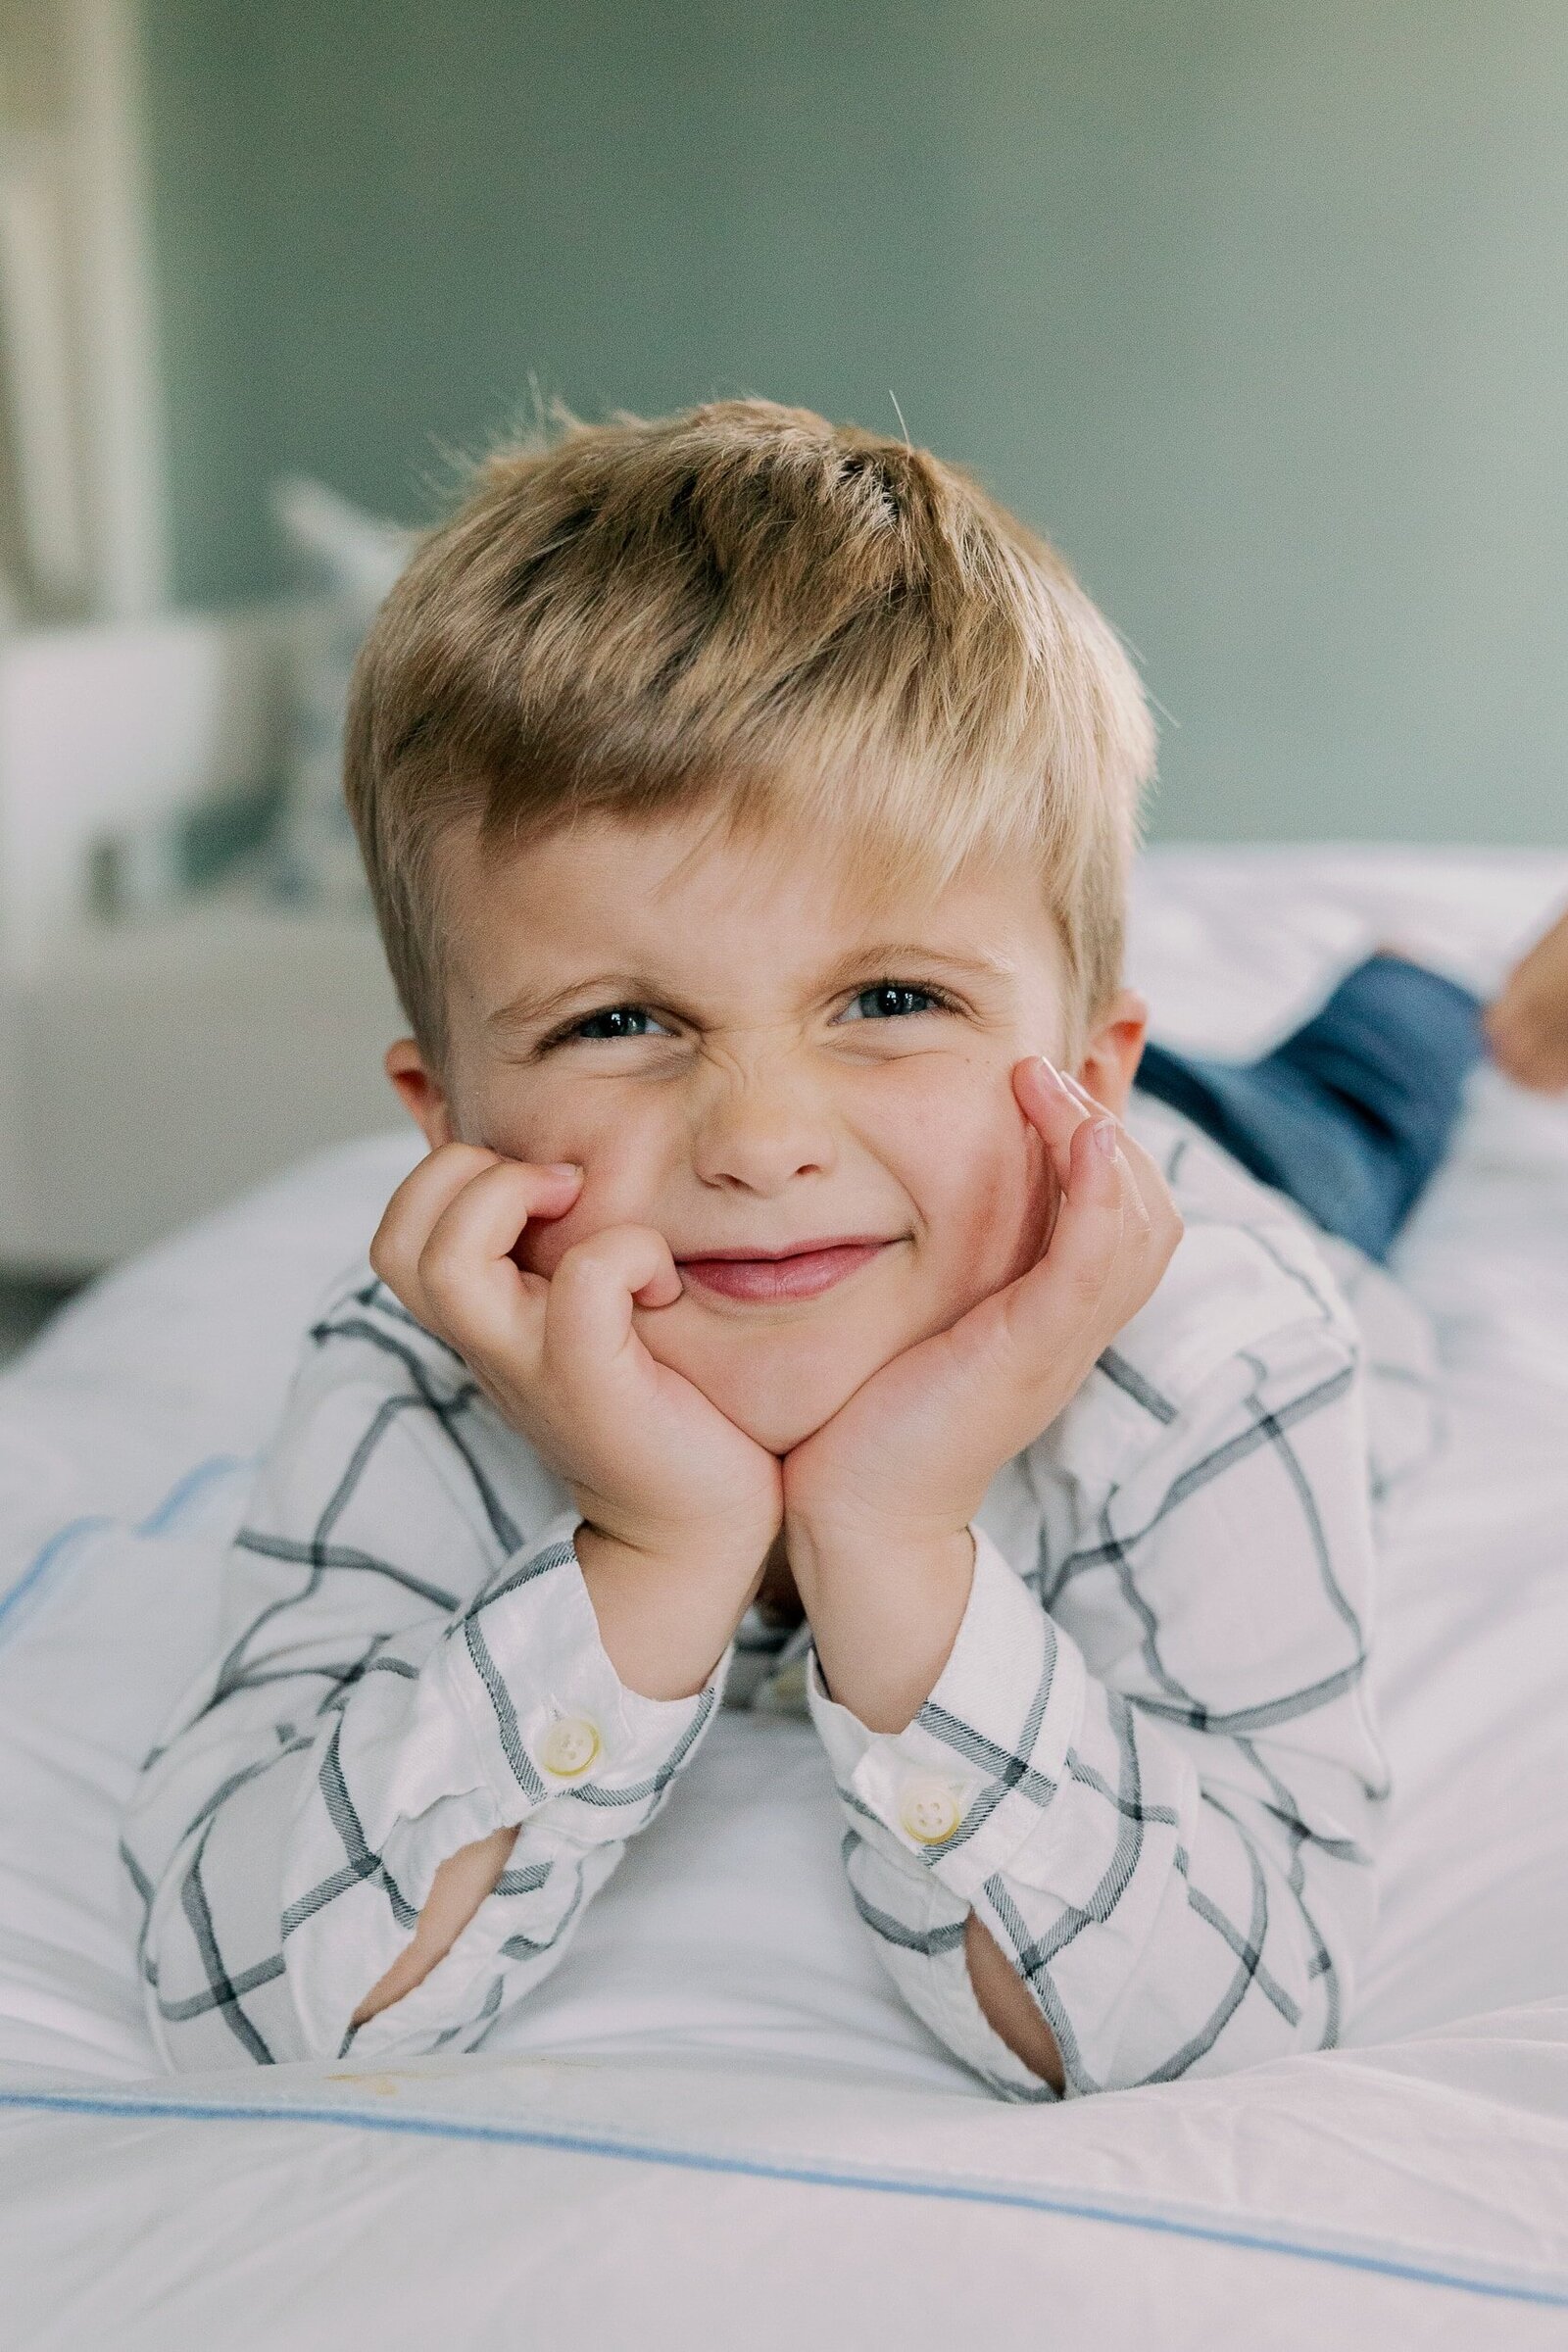 boy making face at camera on bed